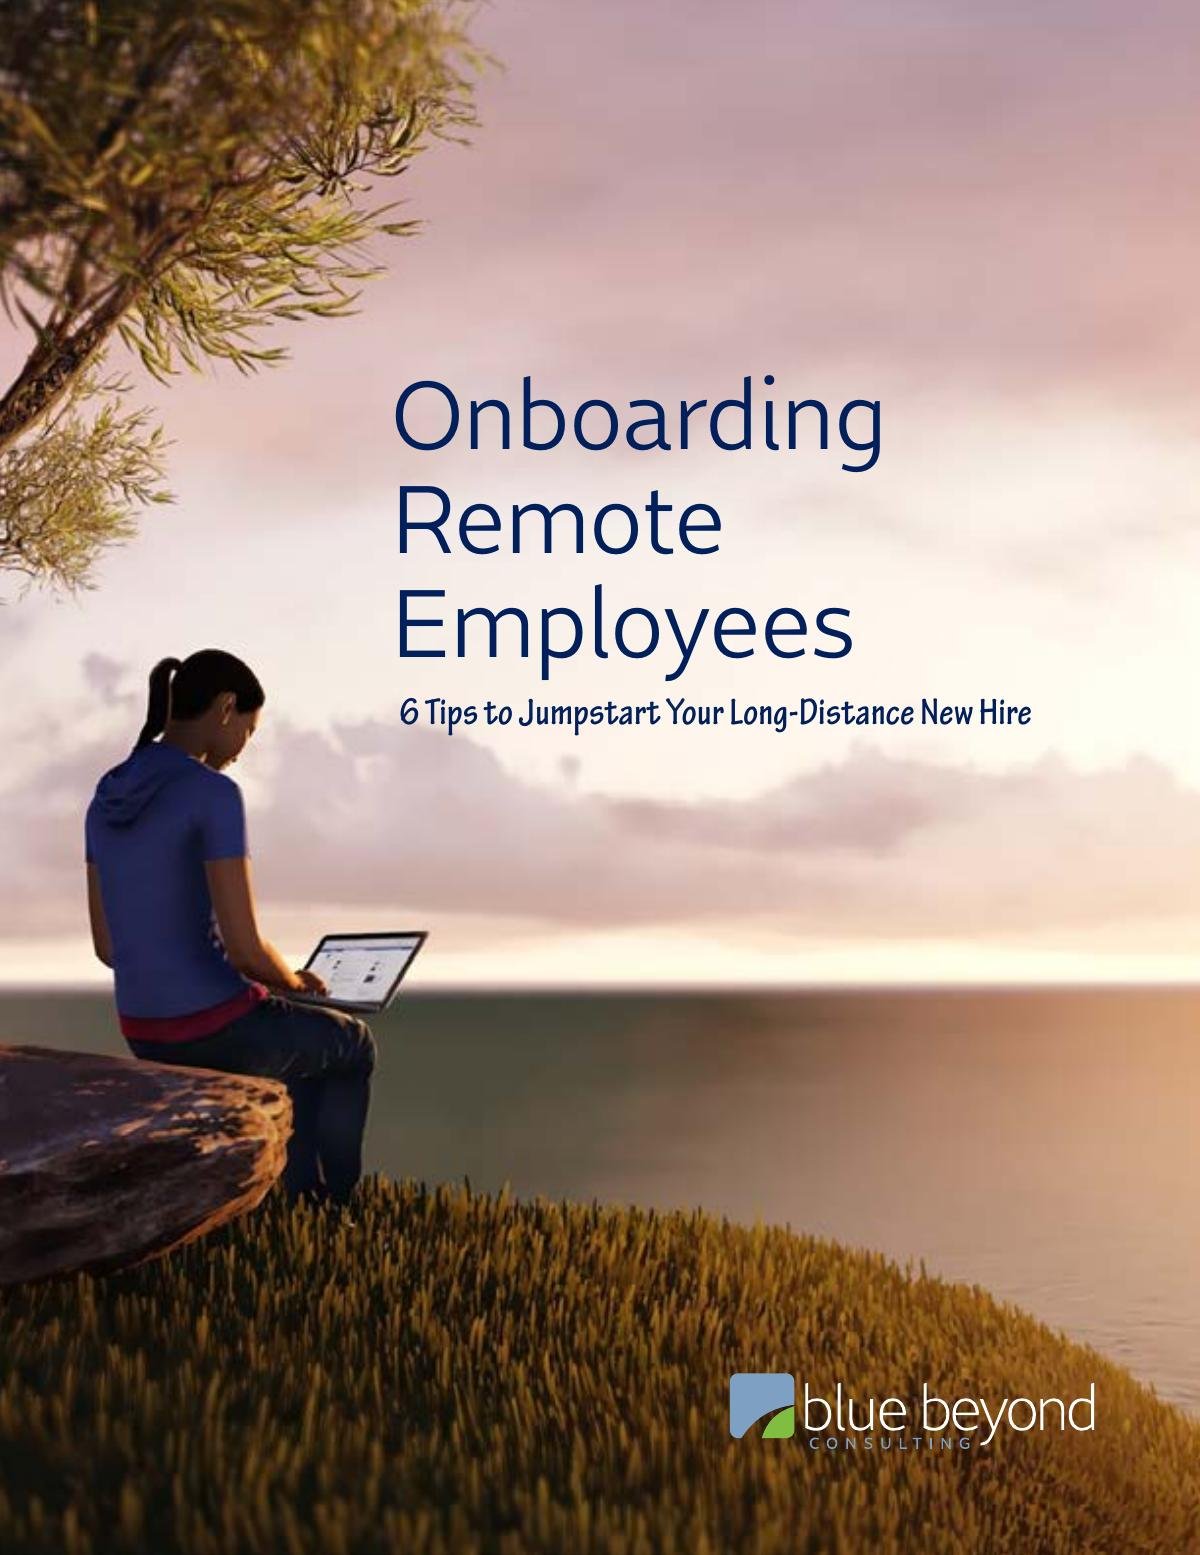 Guide to Onboarding Remote Employees